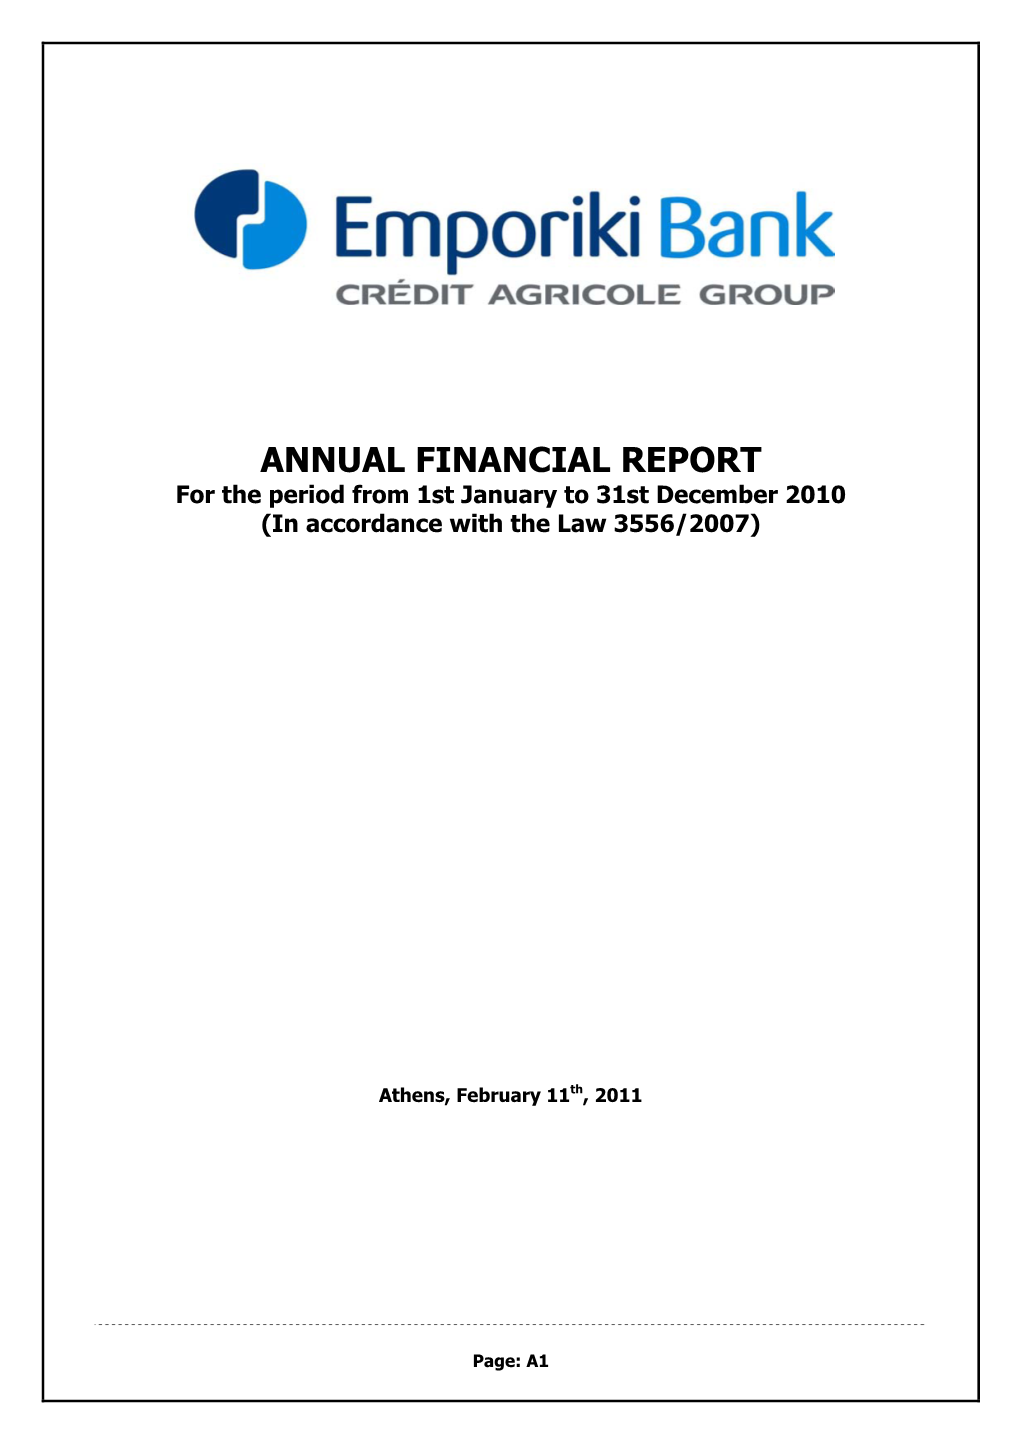 ANNUAL FINANCIAL REPORT for the Period from 1St January to 31St December 2010 (In Accordance with the Law 3556/2007)